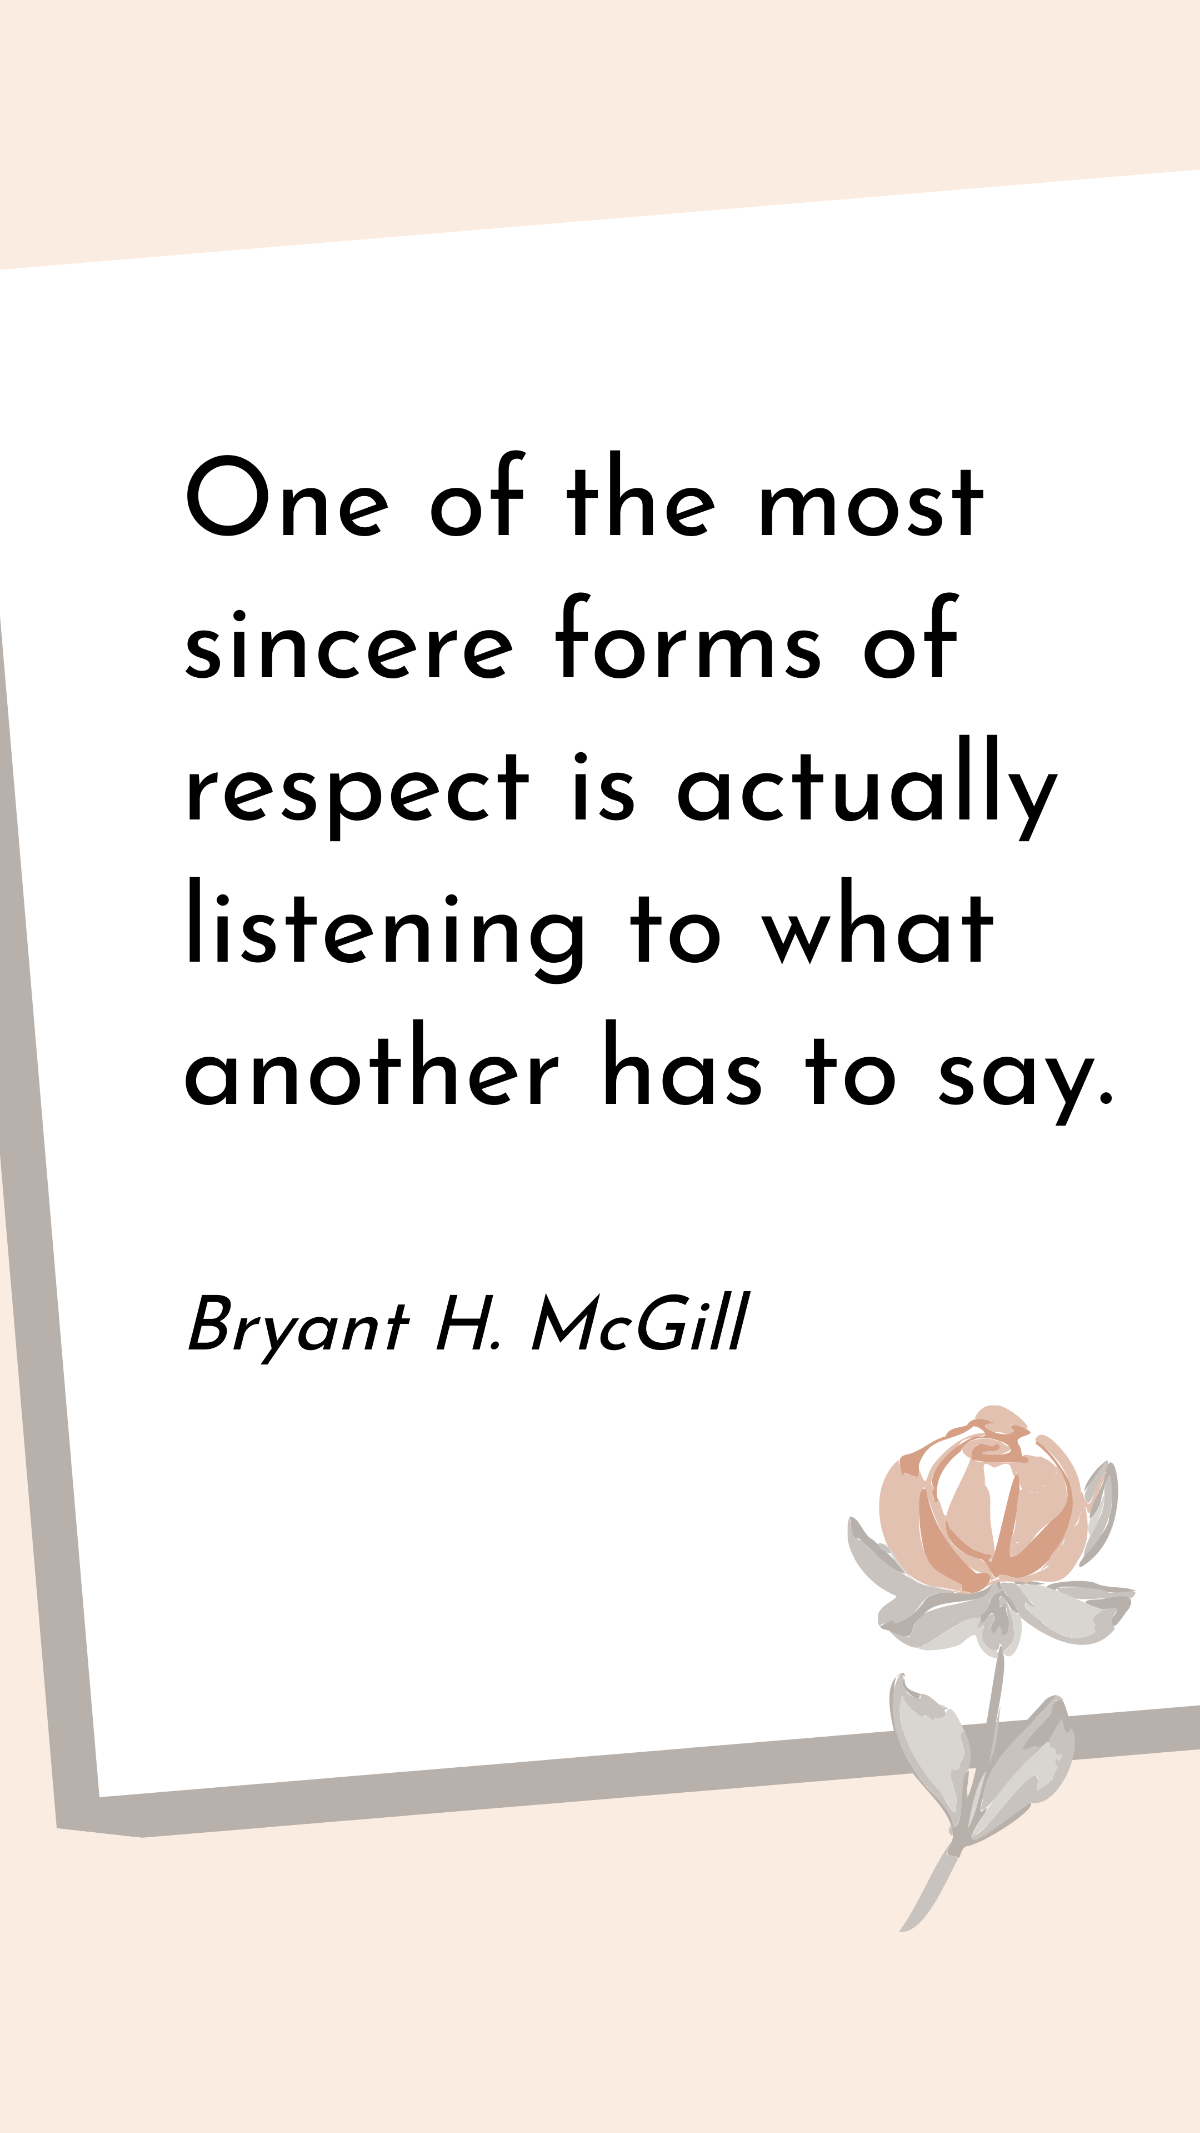 Bryant H. McGill - One of the most sincere forms of respect is actually listening to what another has to say. Template